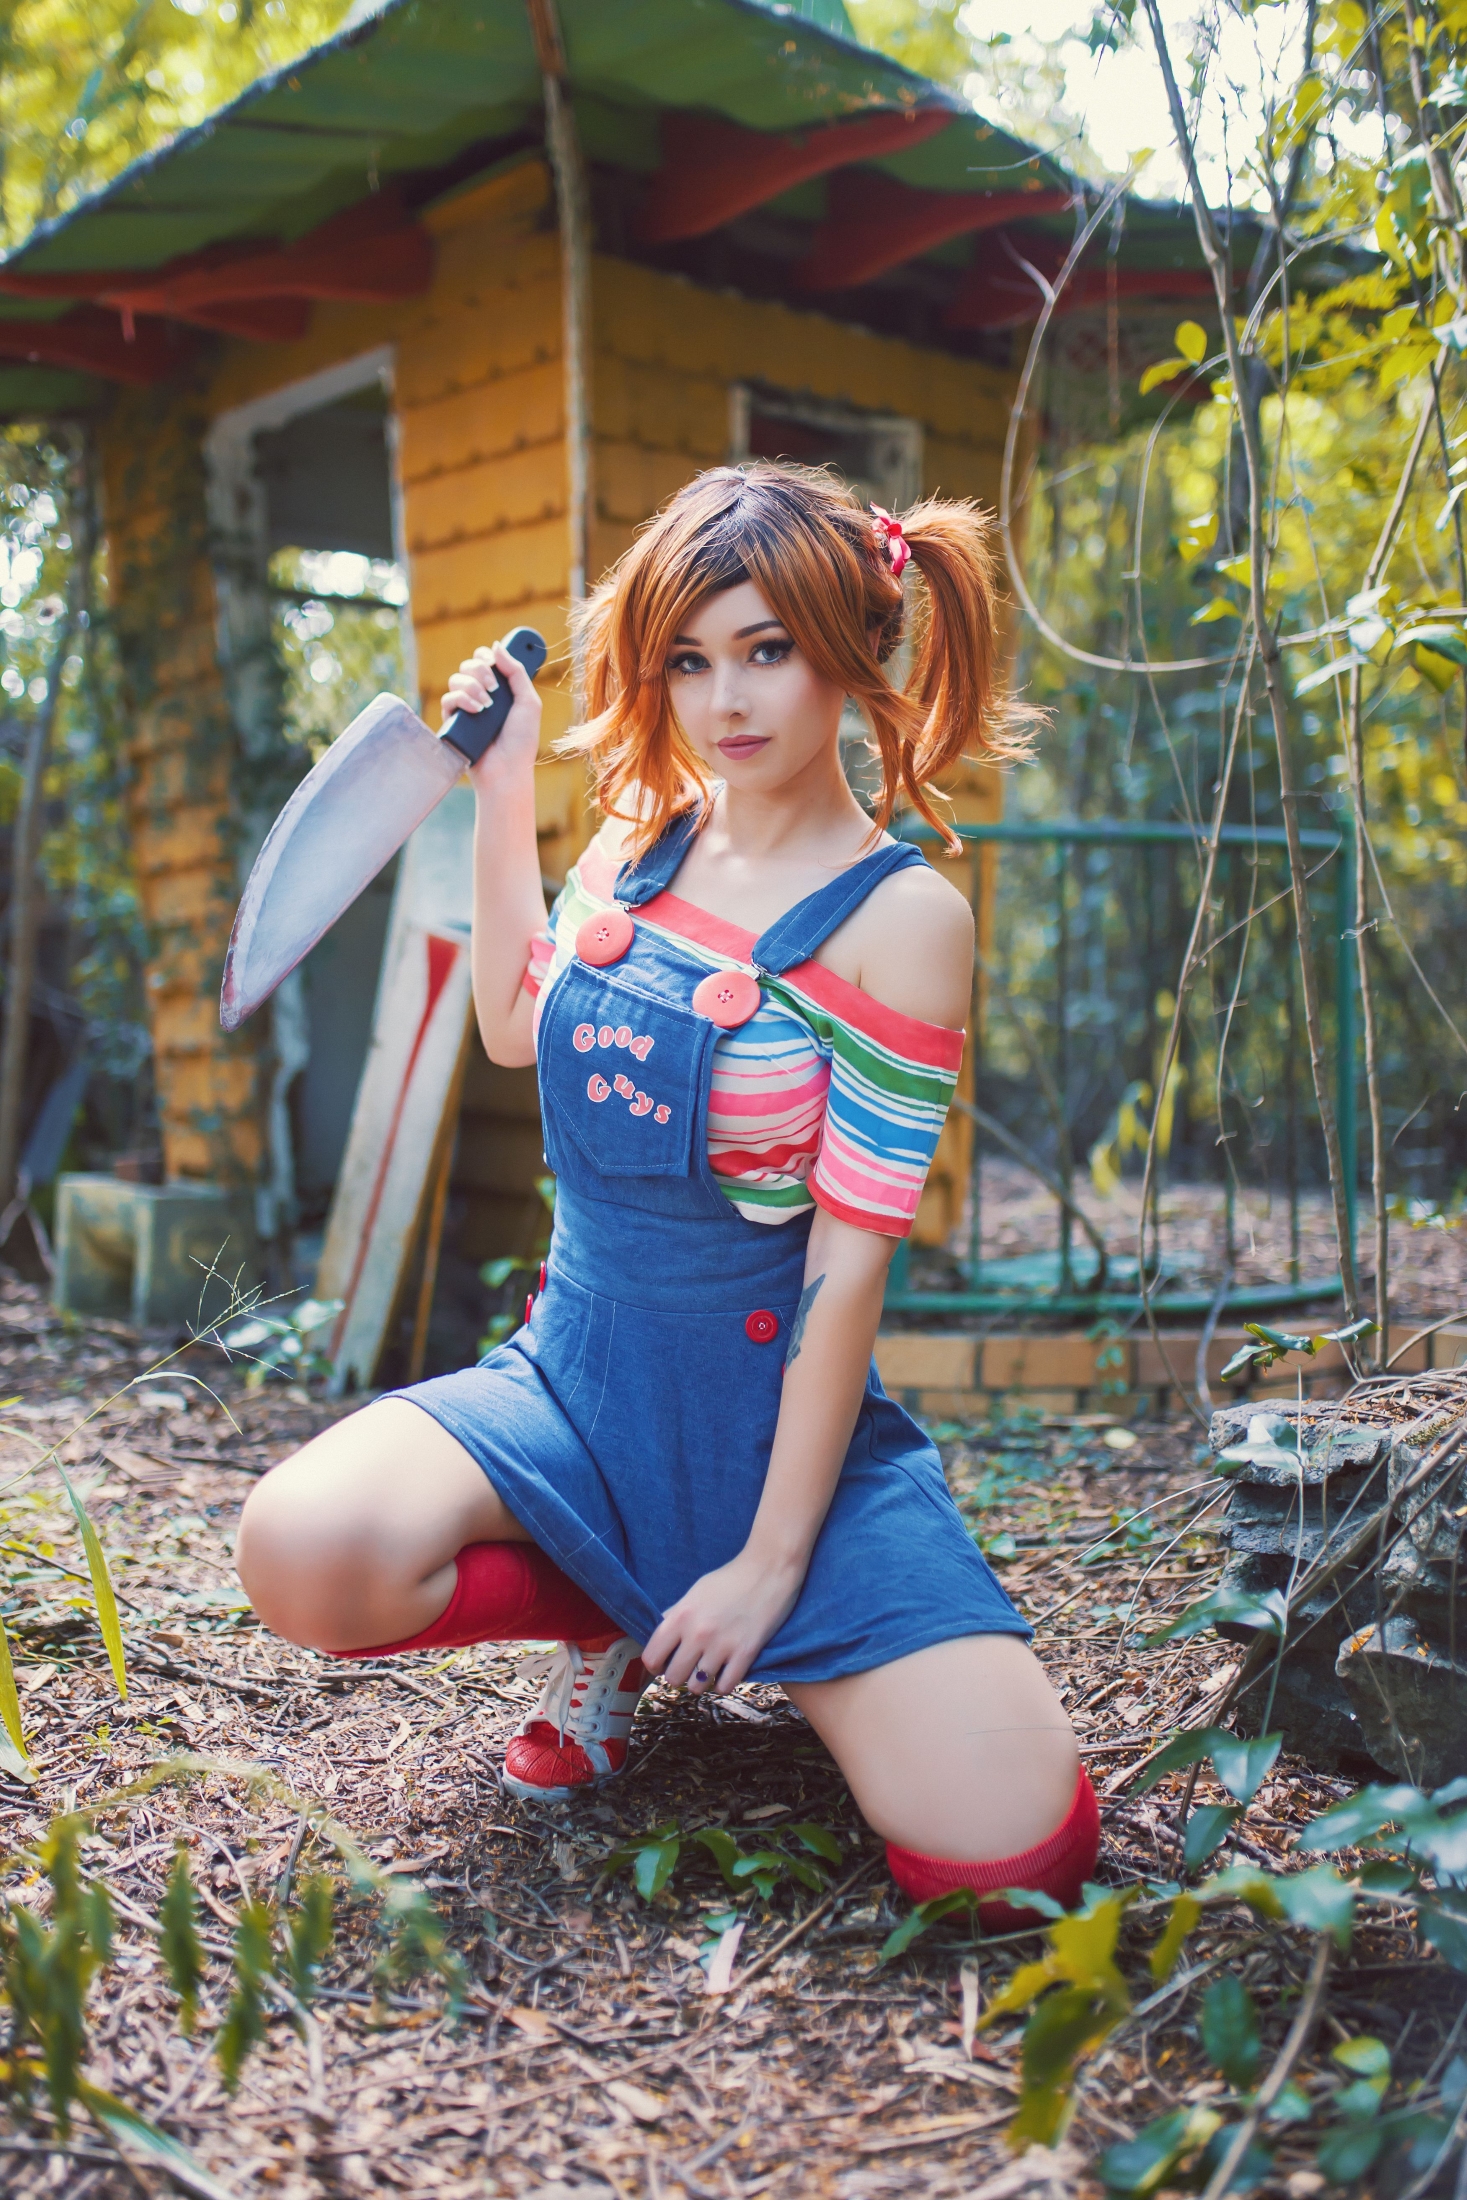 People 1467x2200 Amy Thunderbolt women model dyed hair looking at viewer cosplay Chucky sneakers knee-highs overalls women outdoors squatting knife twintails Child's Play movies